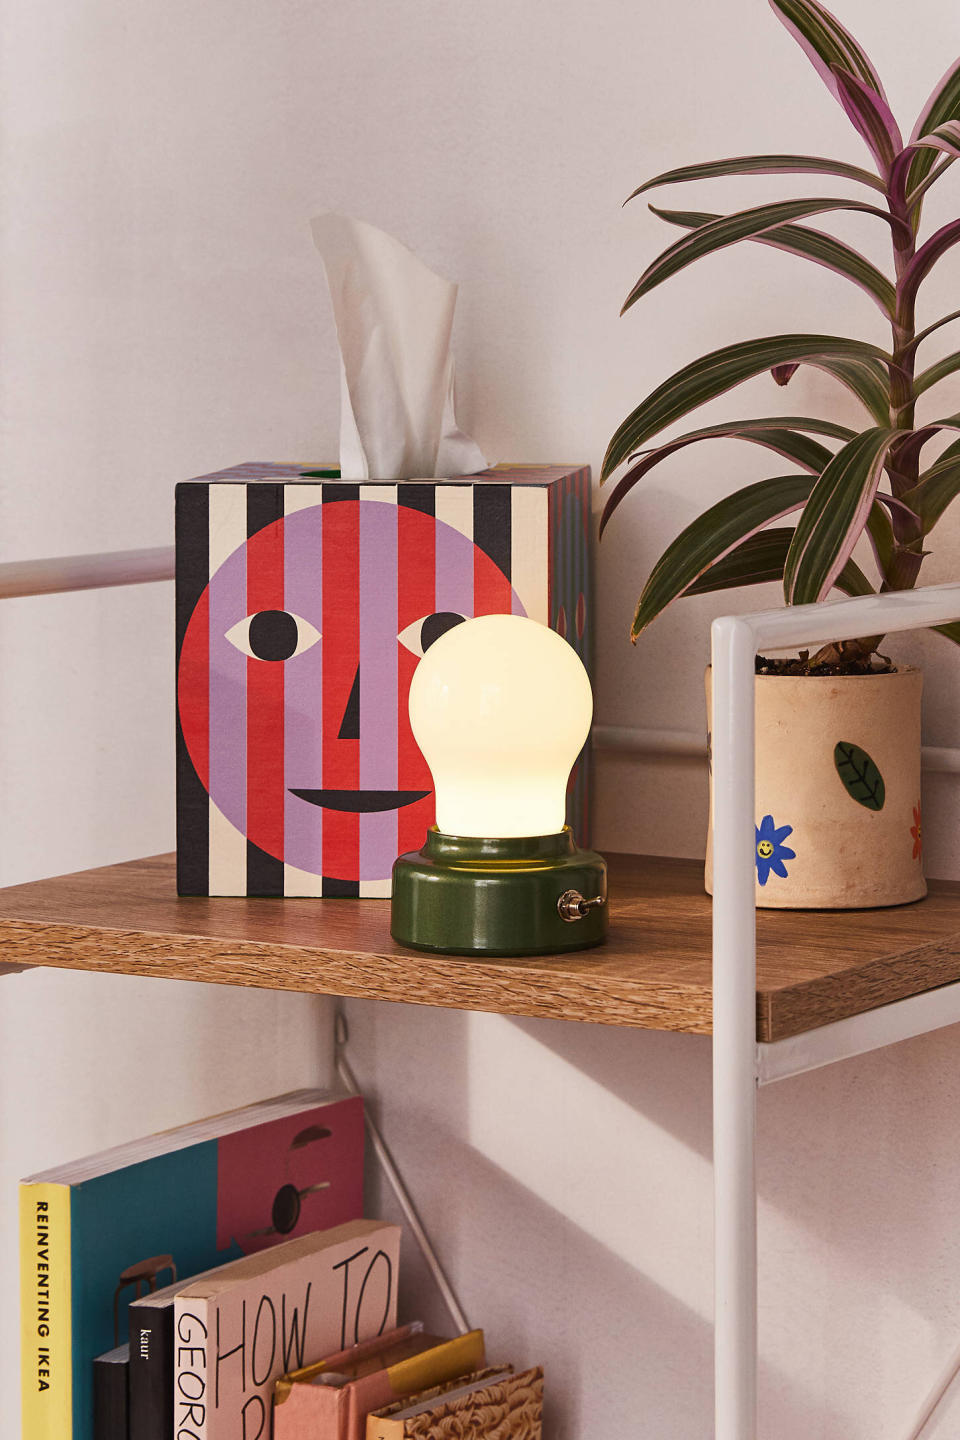 If a lightbulb's constantly going off in your head, this lamp is for you. It's small enough to fit on a tiny desk and not <i>so</i> bright that you can't see your screen. <a href="https://fave.co/2wOajRU" target="_blank" rel="noopener noreferrer">Find for $12 at Urban Outfitters</a>. If this one's not to your taste, there's a <a href="https://fave.co/2w19mWl" target="_blank" rel="noopener noreferrer">classic gold one</a> on sale at Target, too.